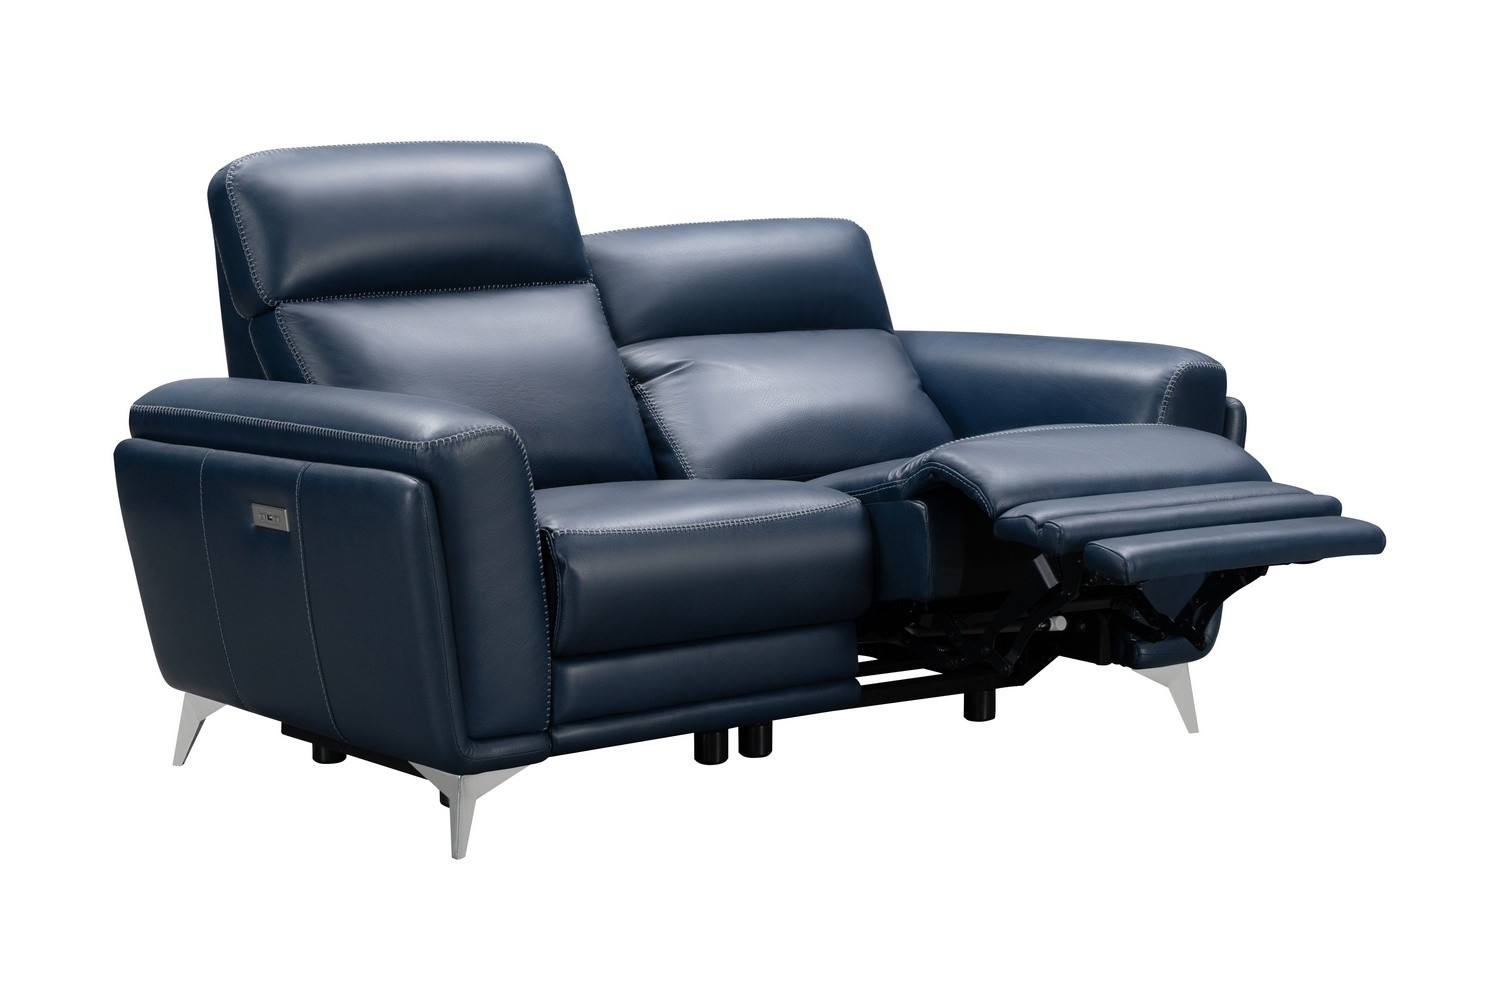 Barcalounger Cameron Power Reclining Loveseat with Power Head Rests - Marco Navy Blue/Leather Match